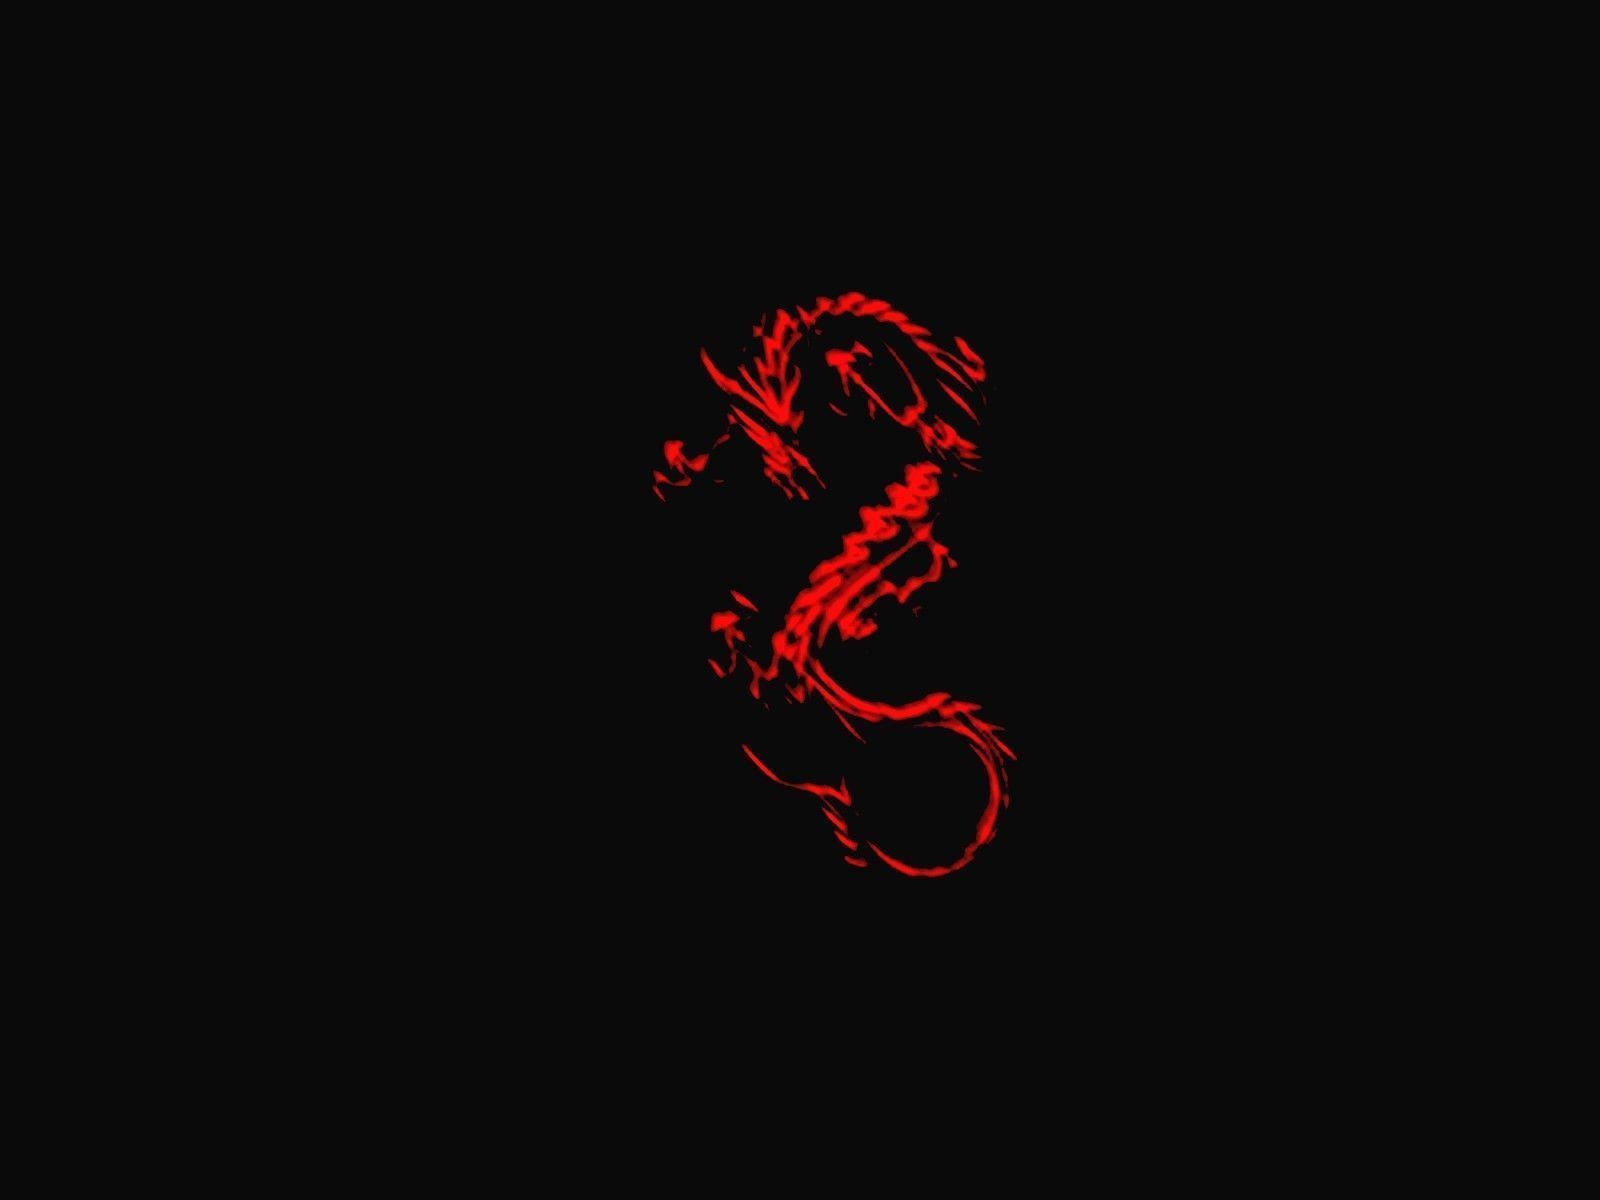 A black background with red flames - Dragon